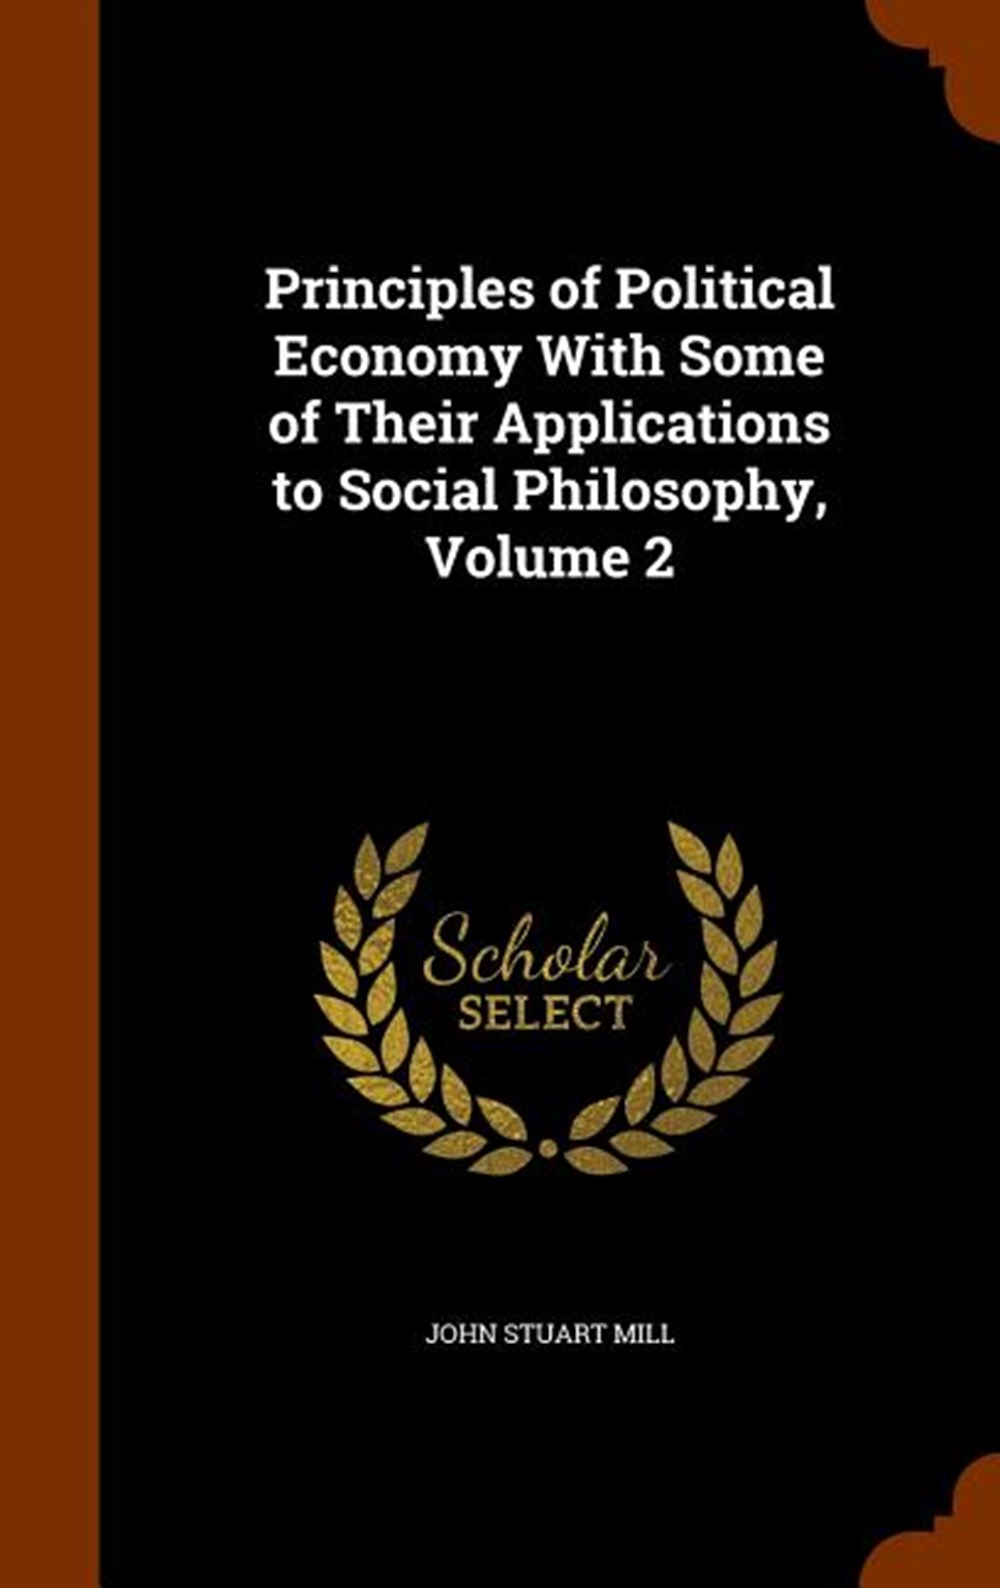 Principles of Political Economy With Some of Their Applications to Social Philosophy, Volume 2